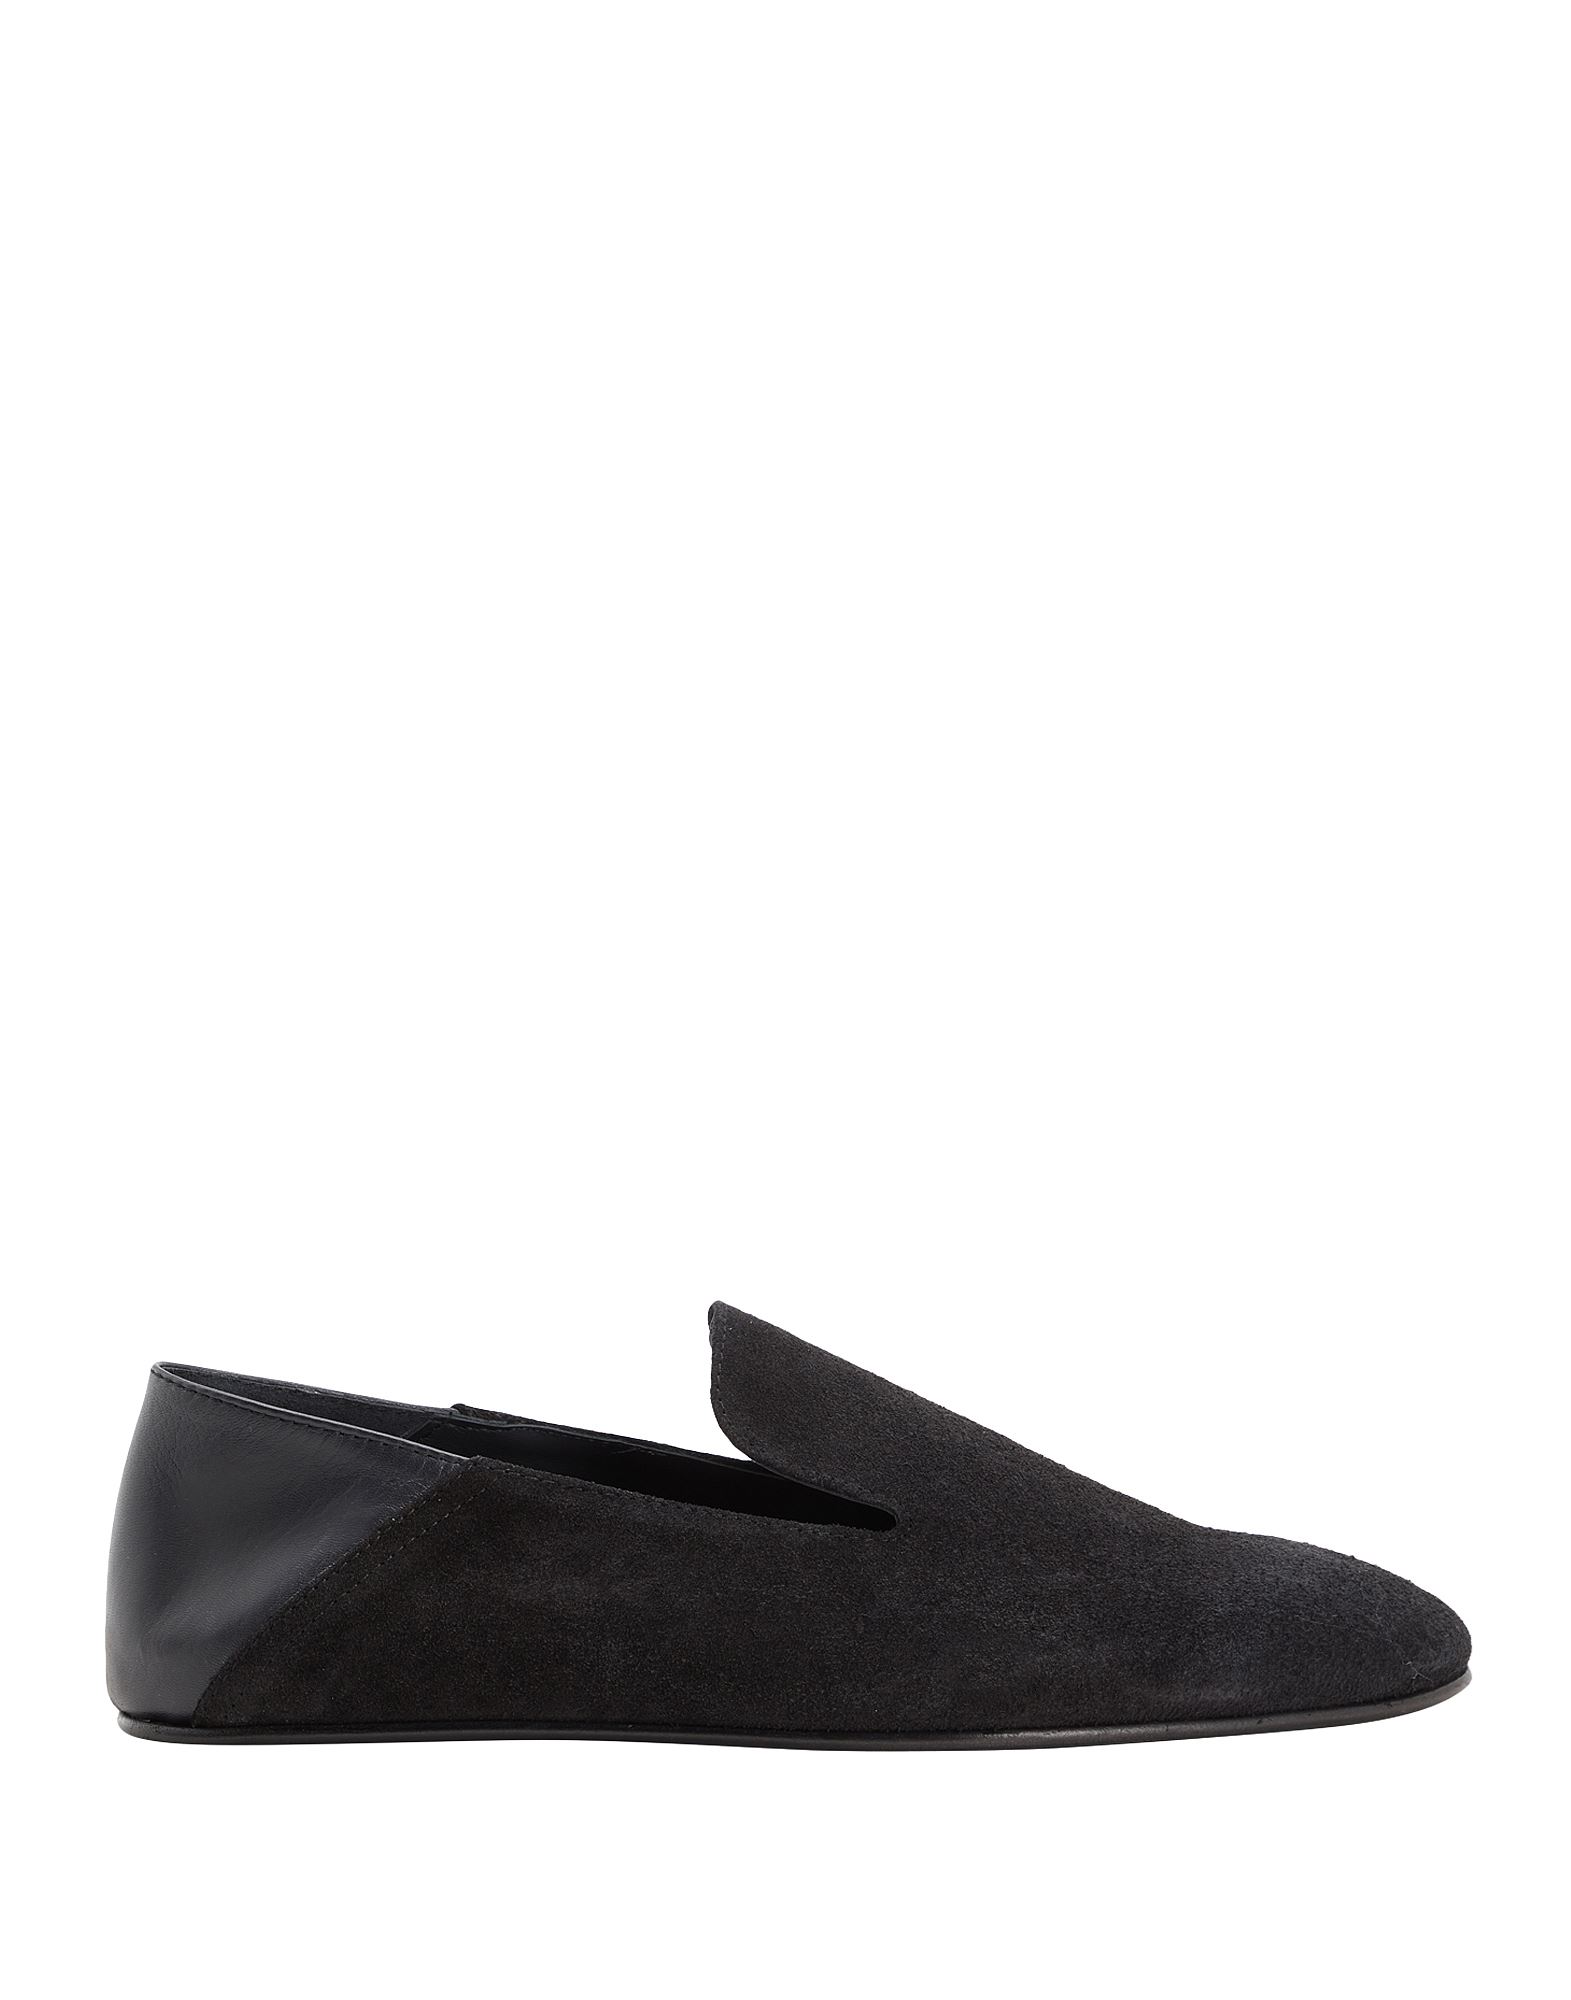 8 By Yoox Loafers In Black